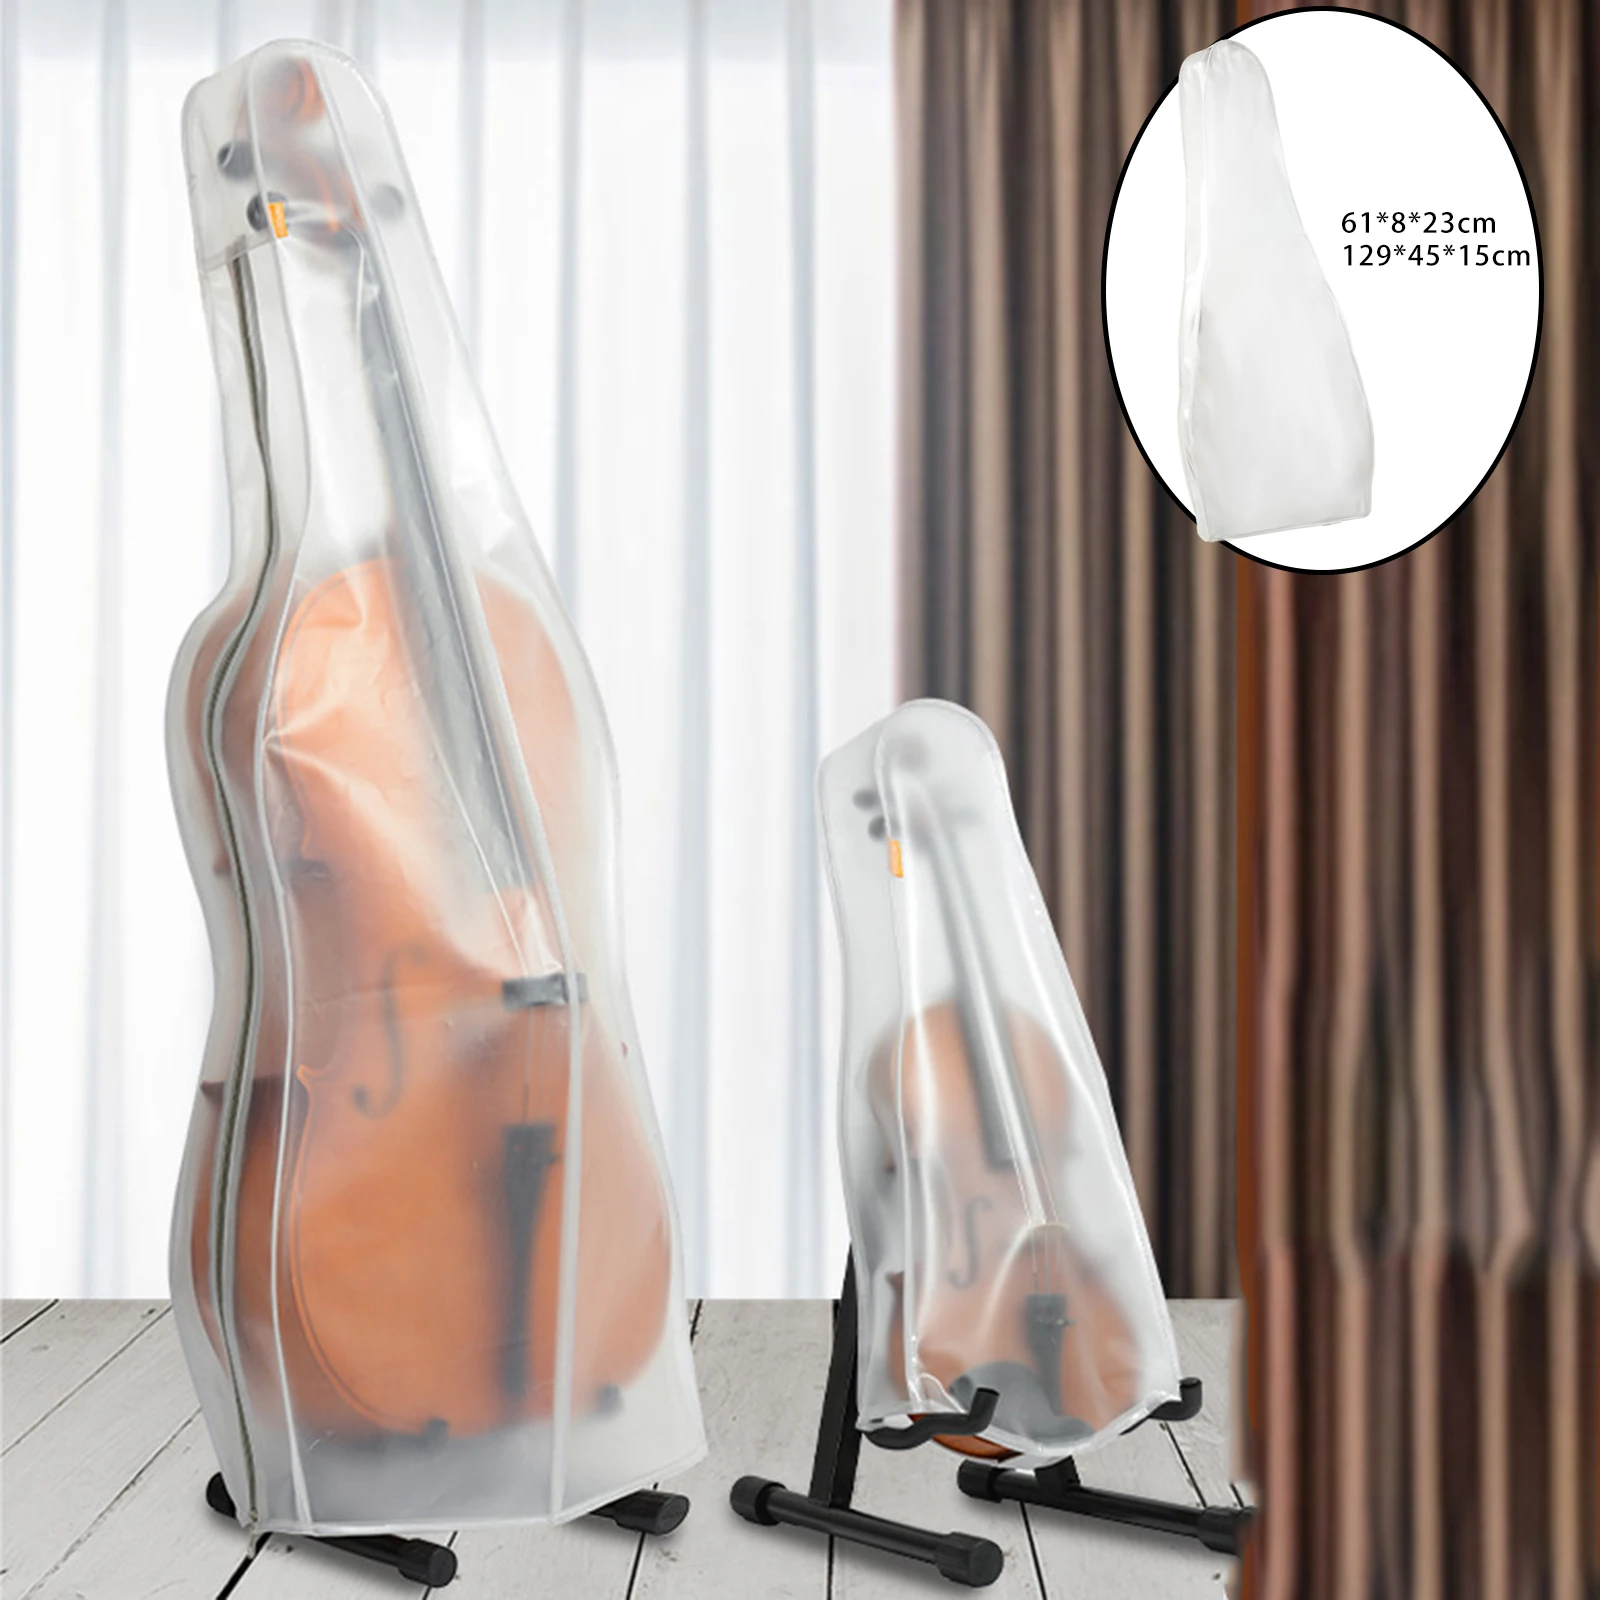 

Clear Violin Shell Case PVC Waterproof Against Dust or Dirt Dust Protector for T-08 Cello Full Size Violin